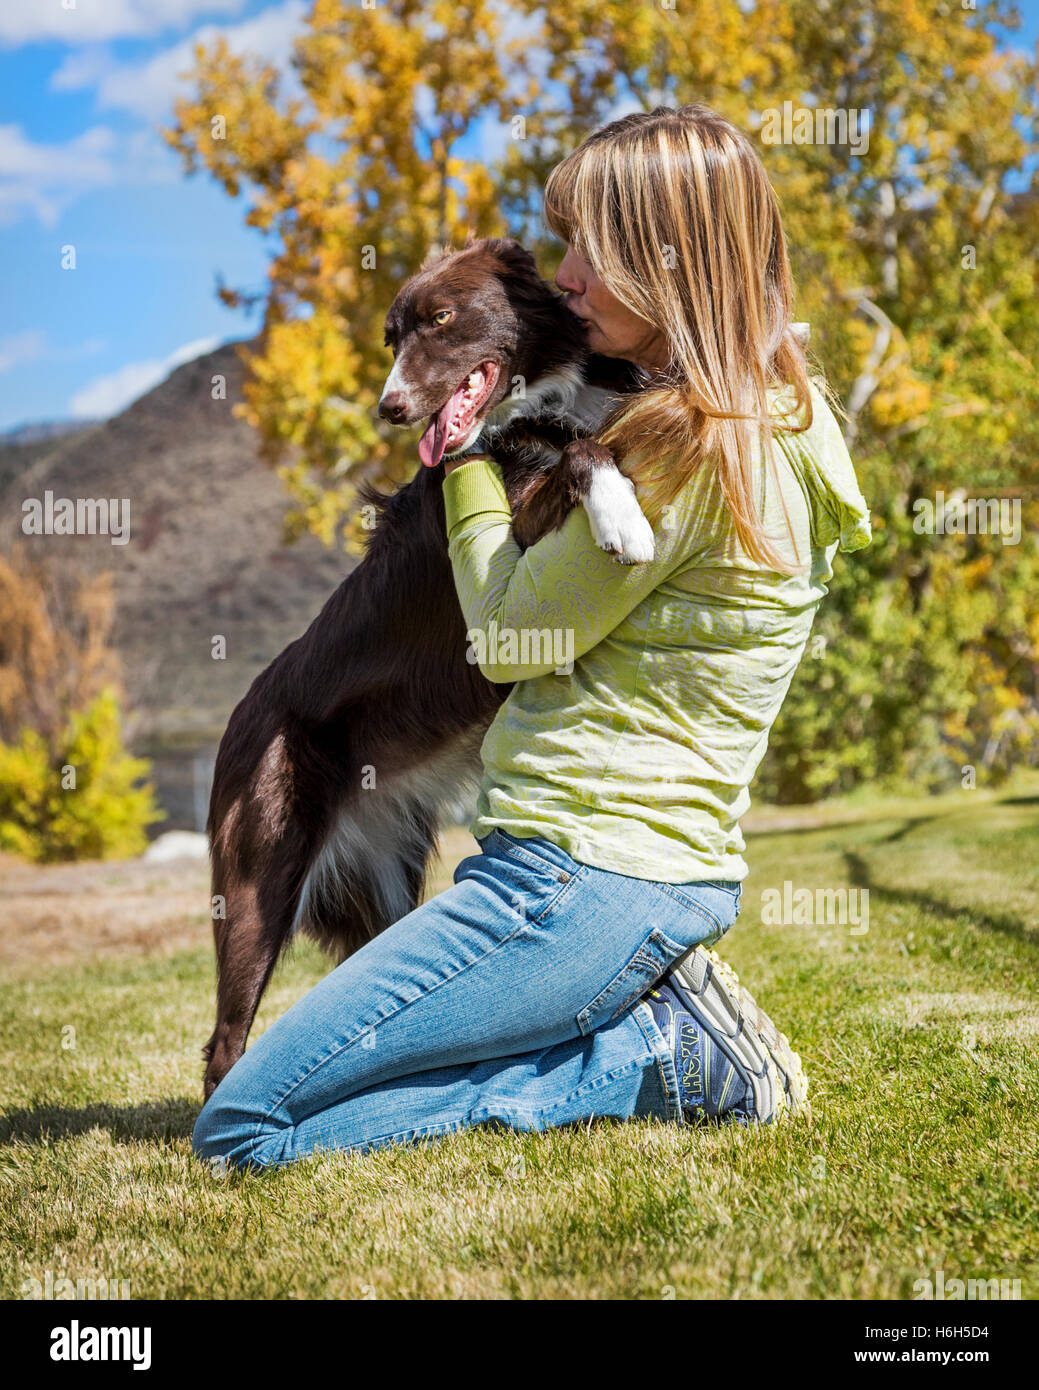 Attractive woman playing with her border collie dog on a grassy field Stock Photo